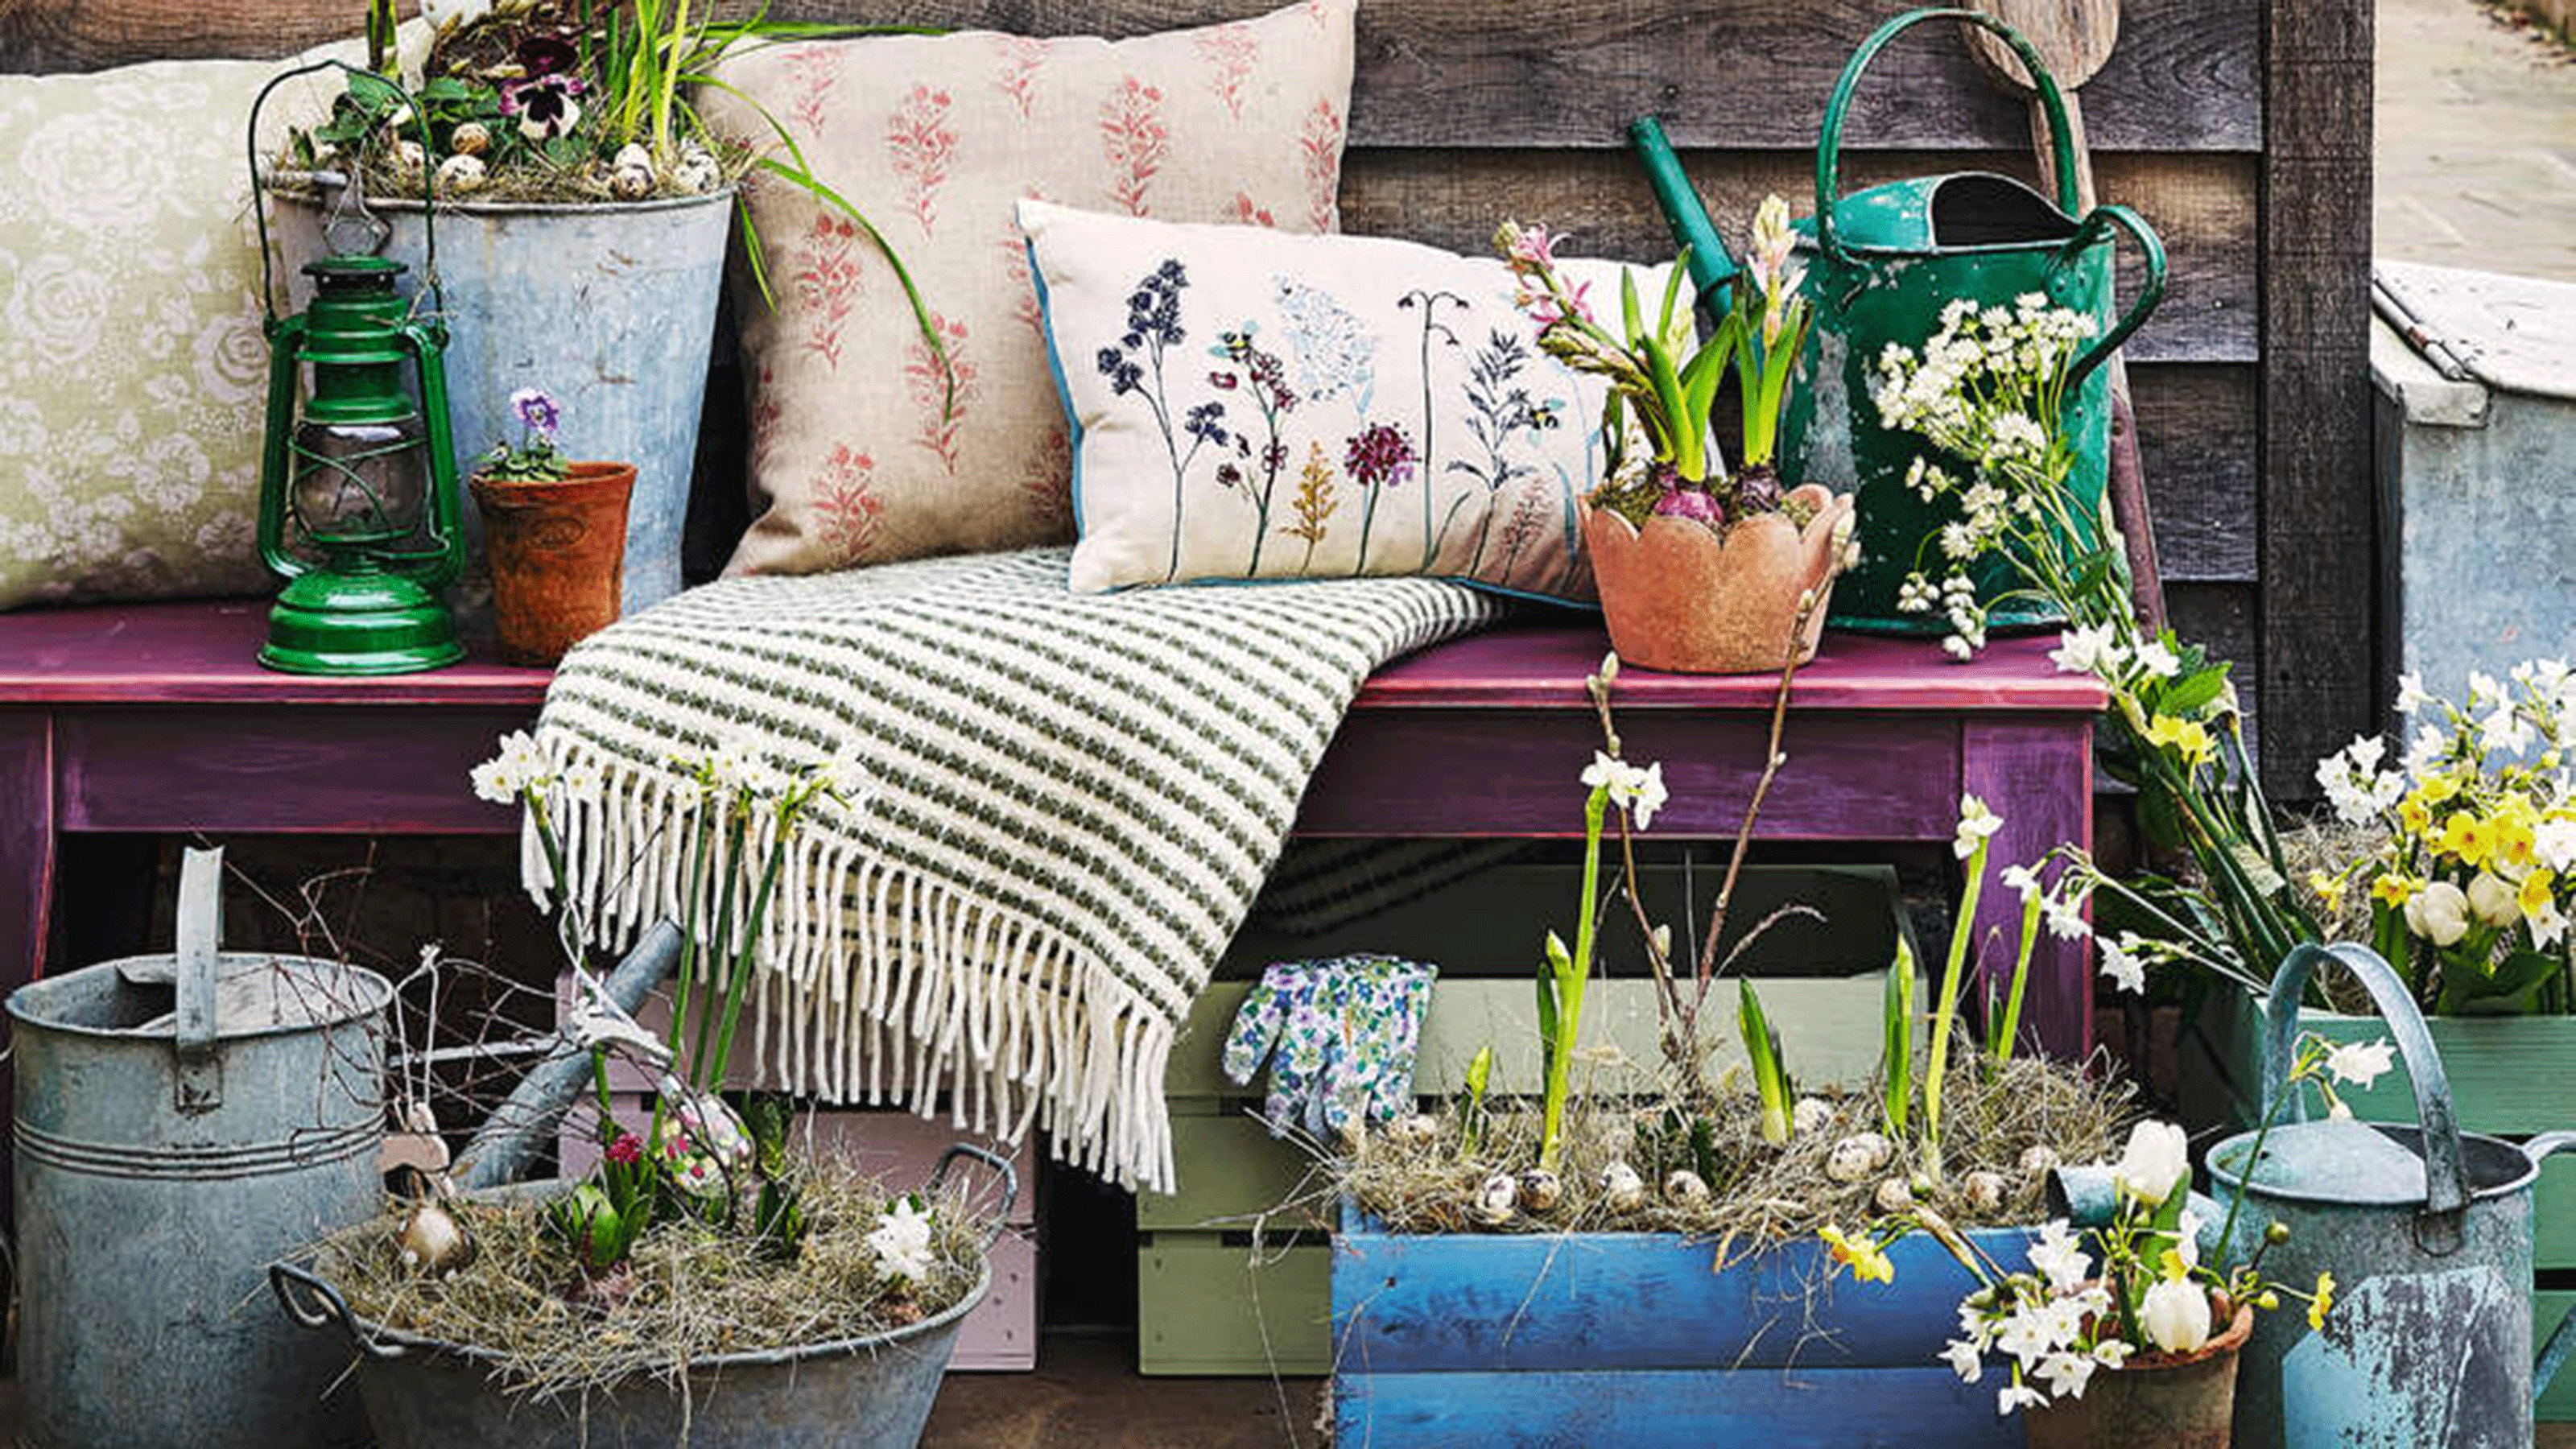 An assortment of planters on garden bench with throws and outdoor cushions